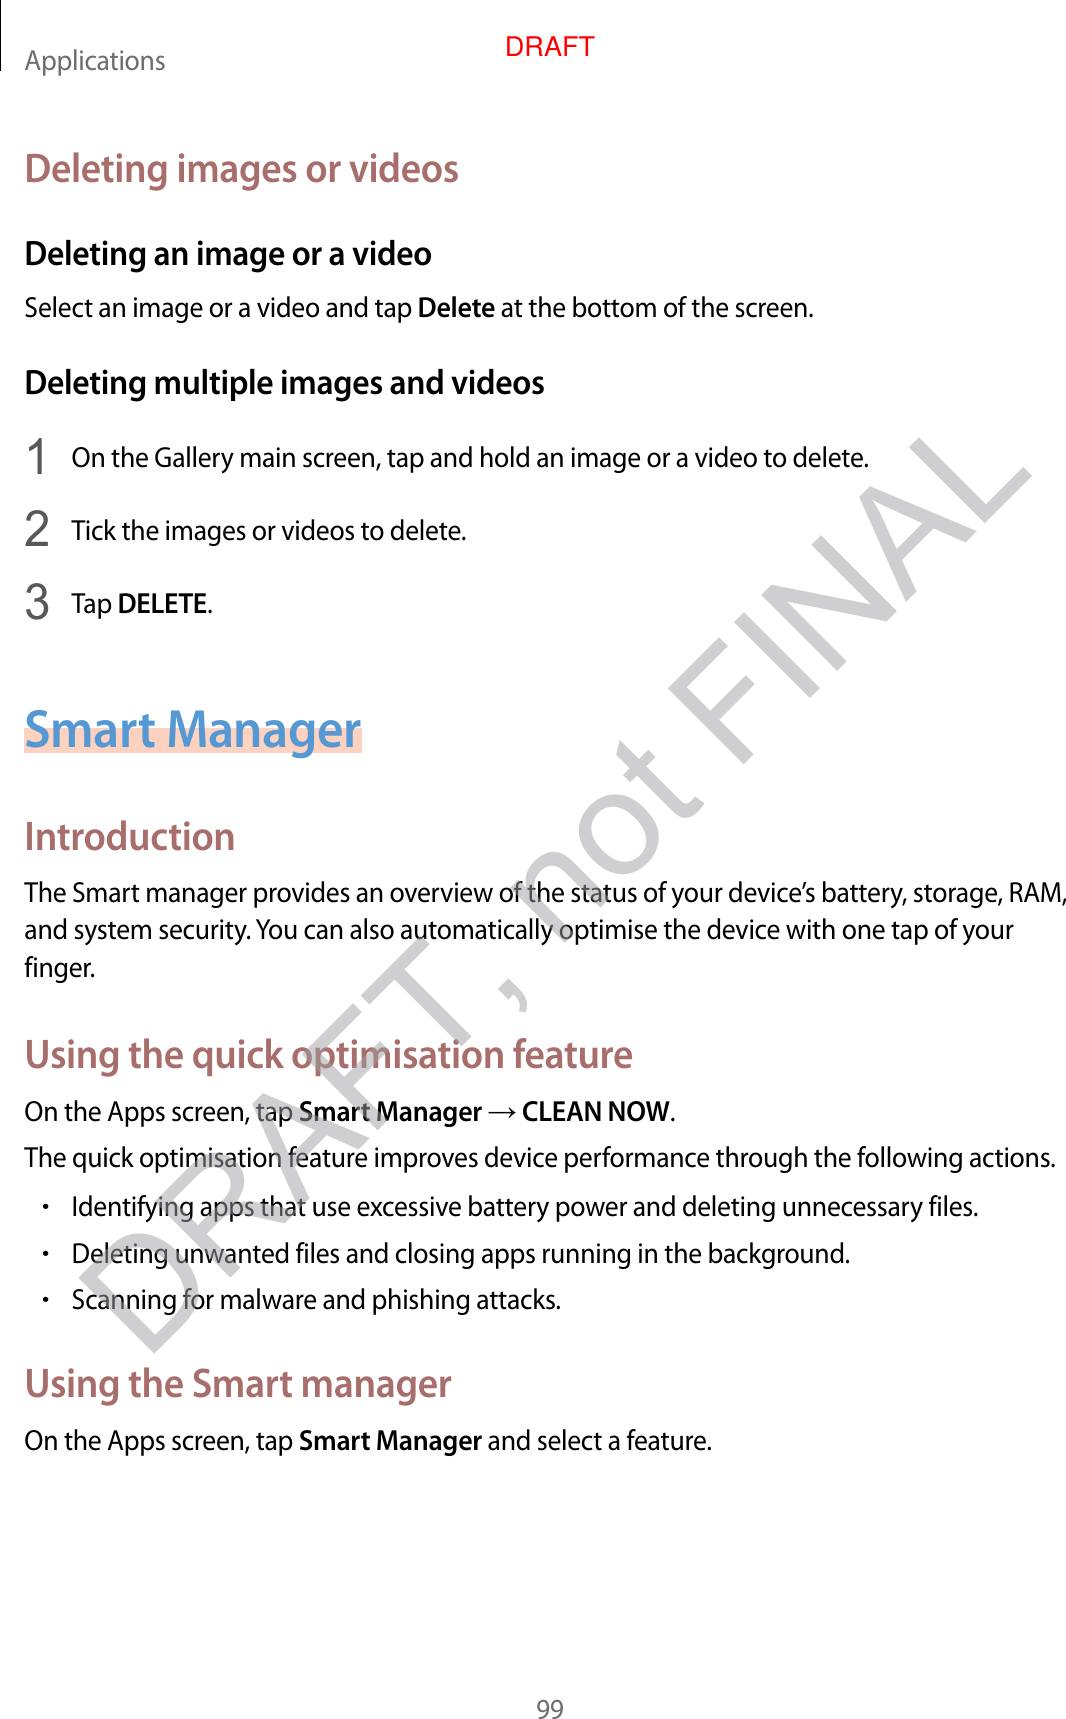 Applications99Deleting images or videosDeleting an image or a videoSelect an image or a video and tap Delete at the bottom of the screen.Deleting multiple images and videos1  On the Gallery main screen, tap and hold an image or a video to delete.2  Tick the images or videos to delete.3  Tap DELETE.Smart ManagerIntroductionThe Smart manager provides an overview of the status of your device’s battery, storage, RAM, and system security. You can also automatically optimise the device with one tap of your finger.Using the quick optimisation featureOn the Apps screen, tap Smart Manager  CLEAN NOW.The quick optimisation feature improves device performance through the following actions.•Identifying apps that use excessive battery power and deleting unnecessary files.•Deleting unwanted files and closing apps running in the background.•Scanning for malware and phishing attacks.Using the Smart managerOn the Apps screen, tap Smart Manager and select a feature.DRAFT, not FINALDRAFT